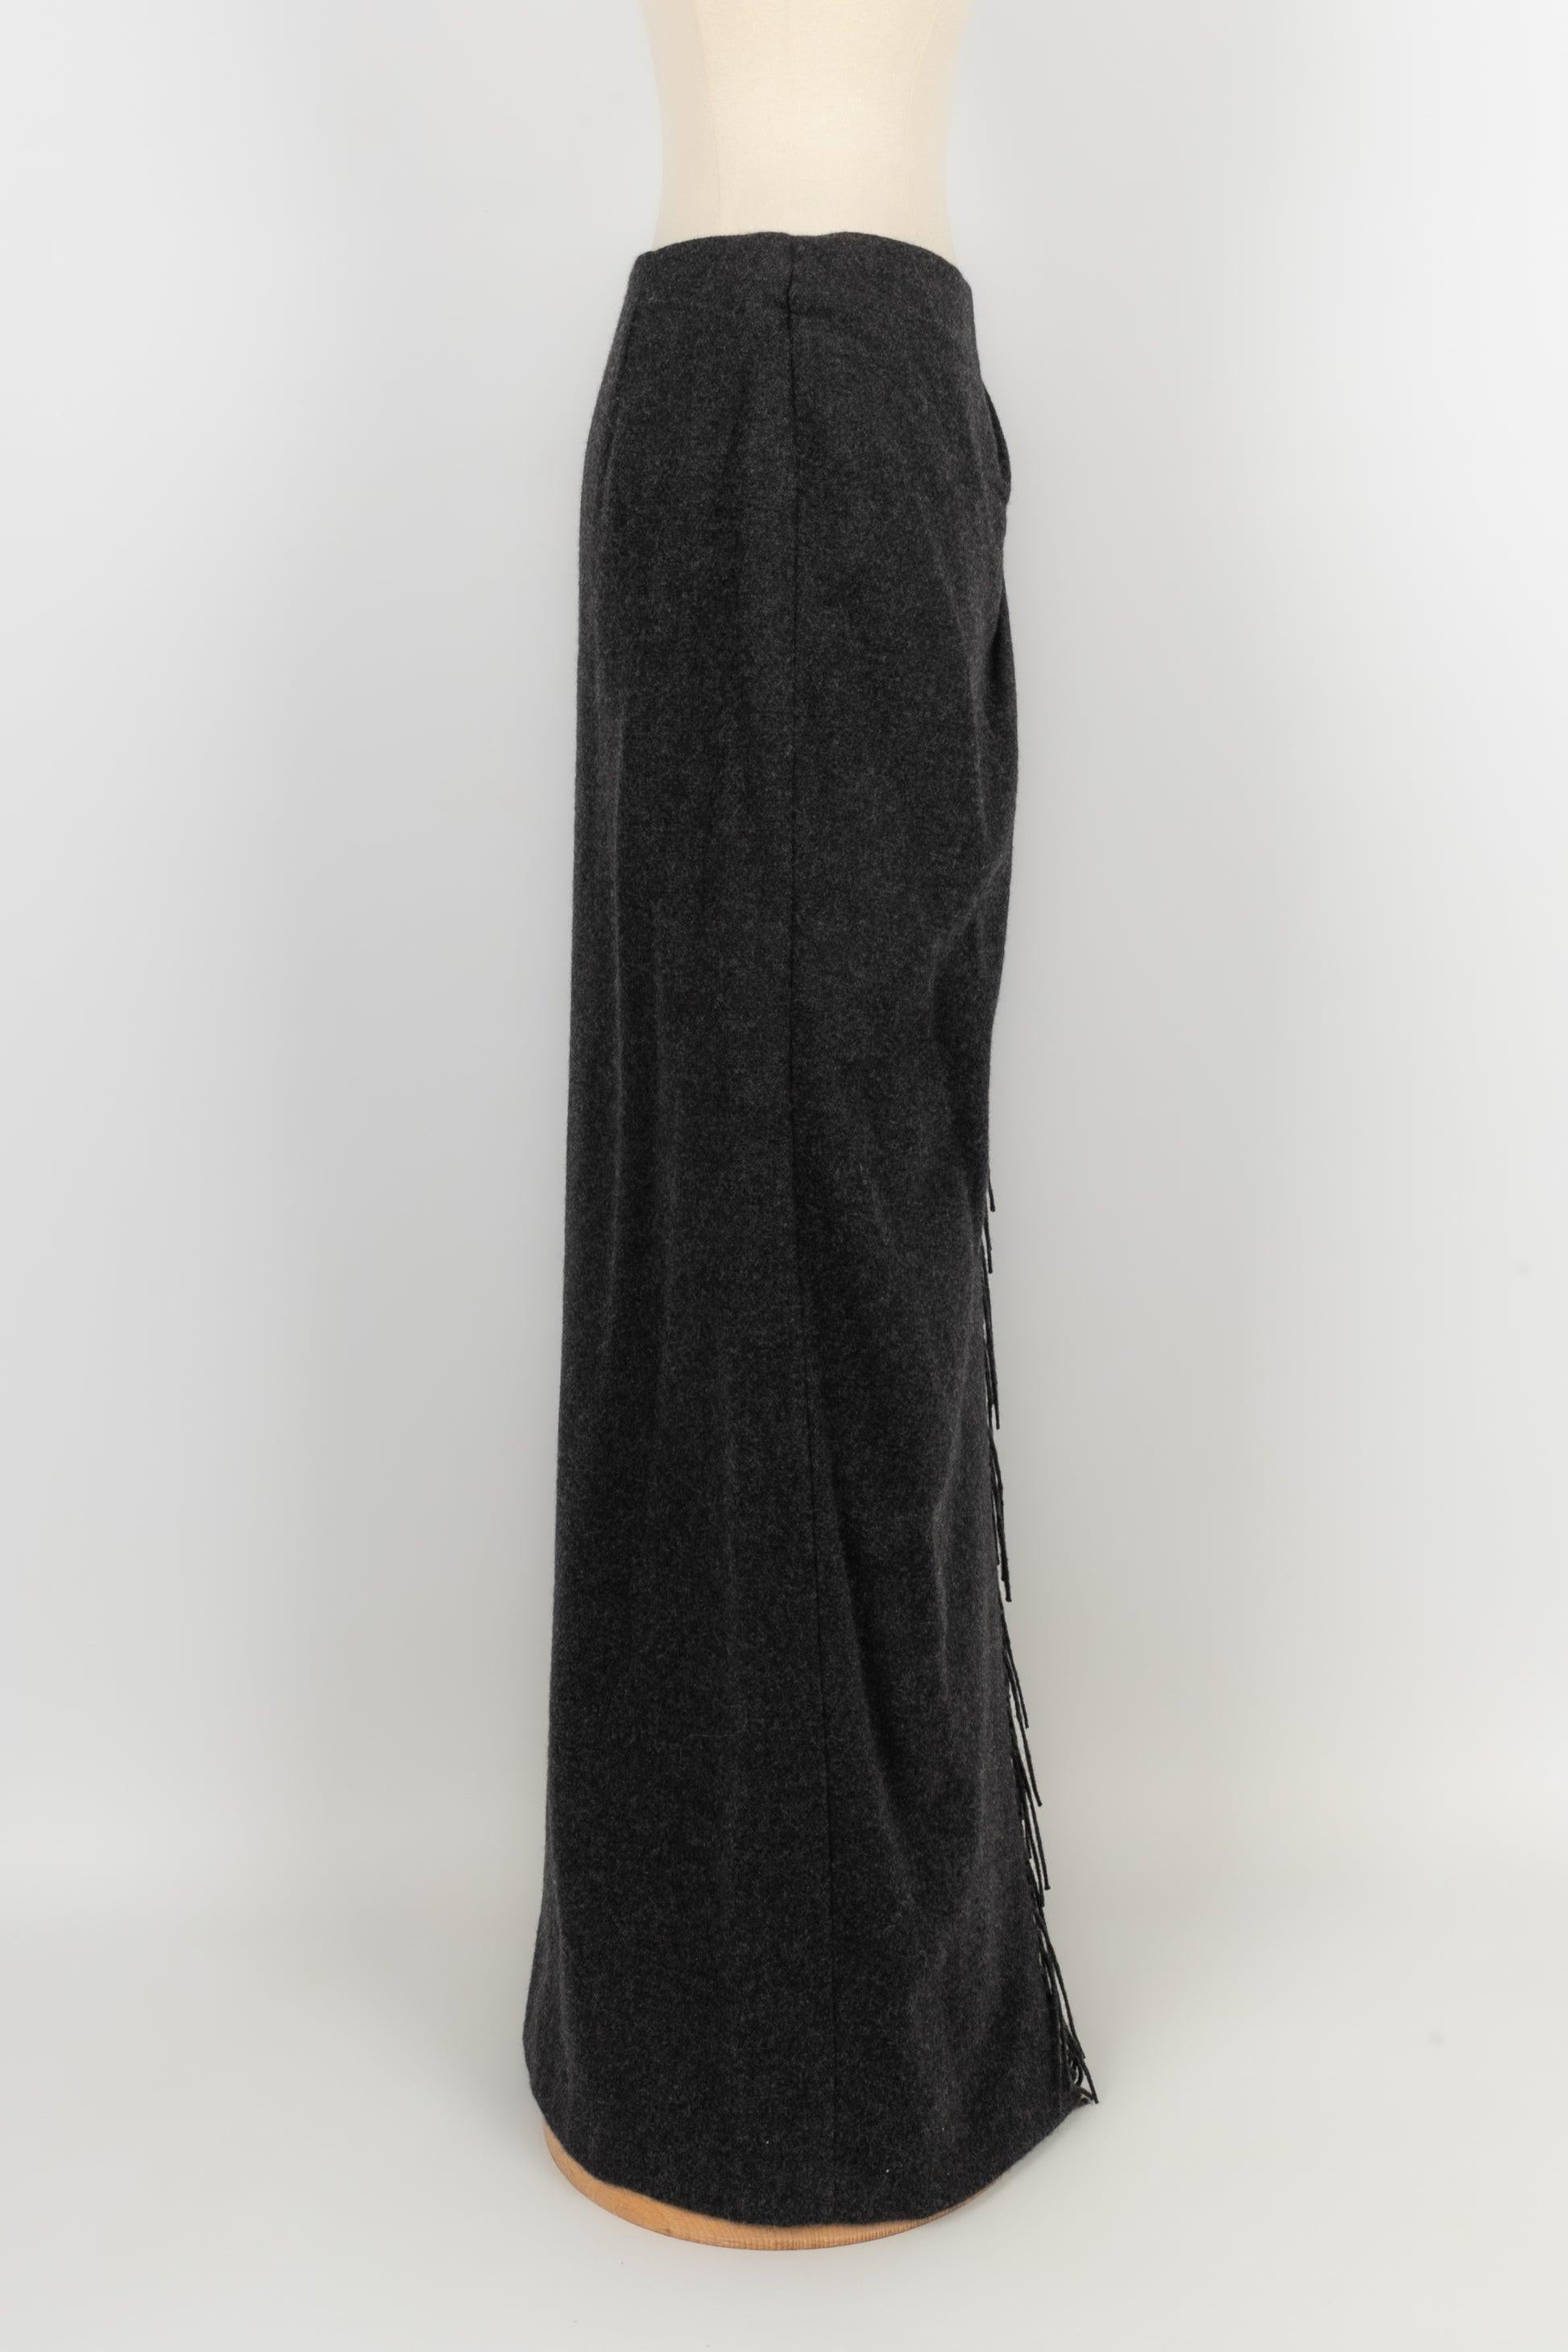 Mugler - Angora and wool wraparound skirt. No size indicated, it fits a 36FR/38FR.

Additional information:
Condition: Very good condition
Dimensions: Waist: 35 cm
Hips: 44 cm
Length: 104 cm

Seller reference: FJ80